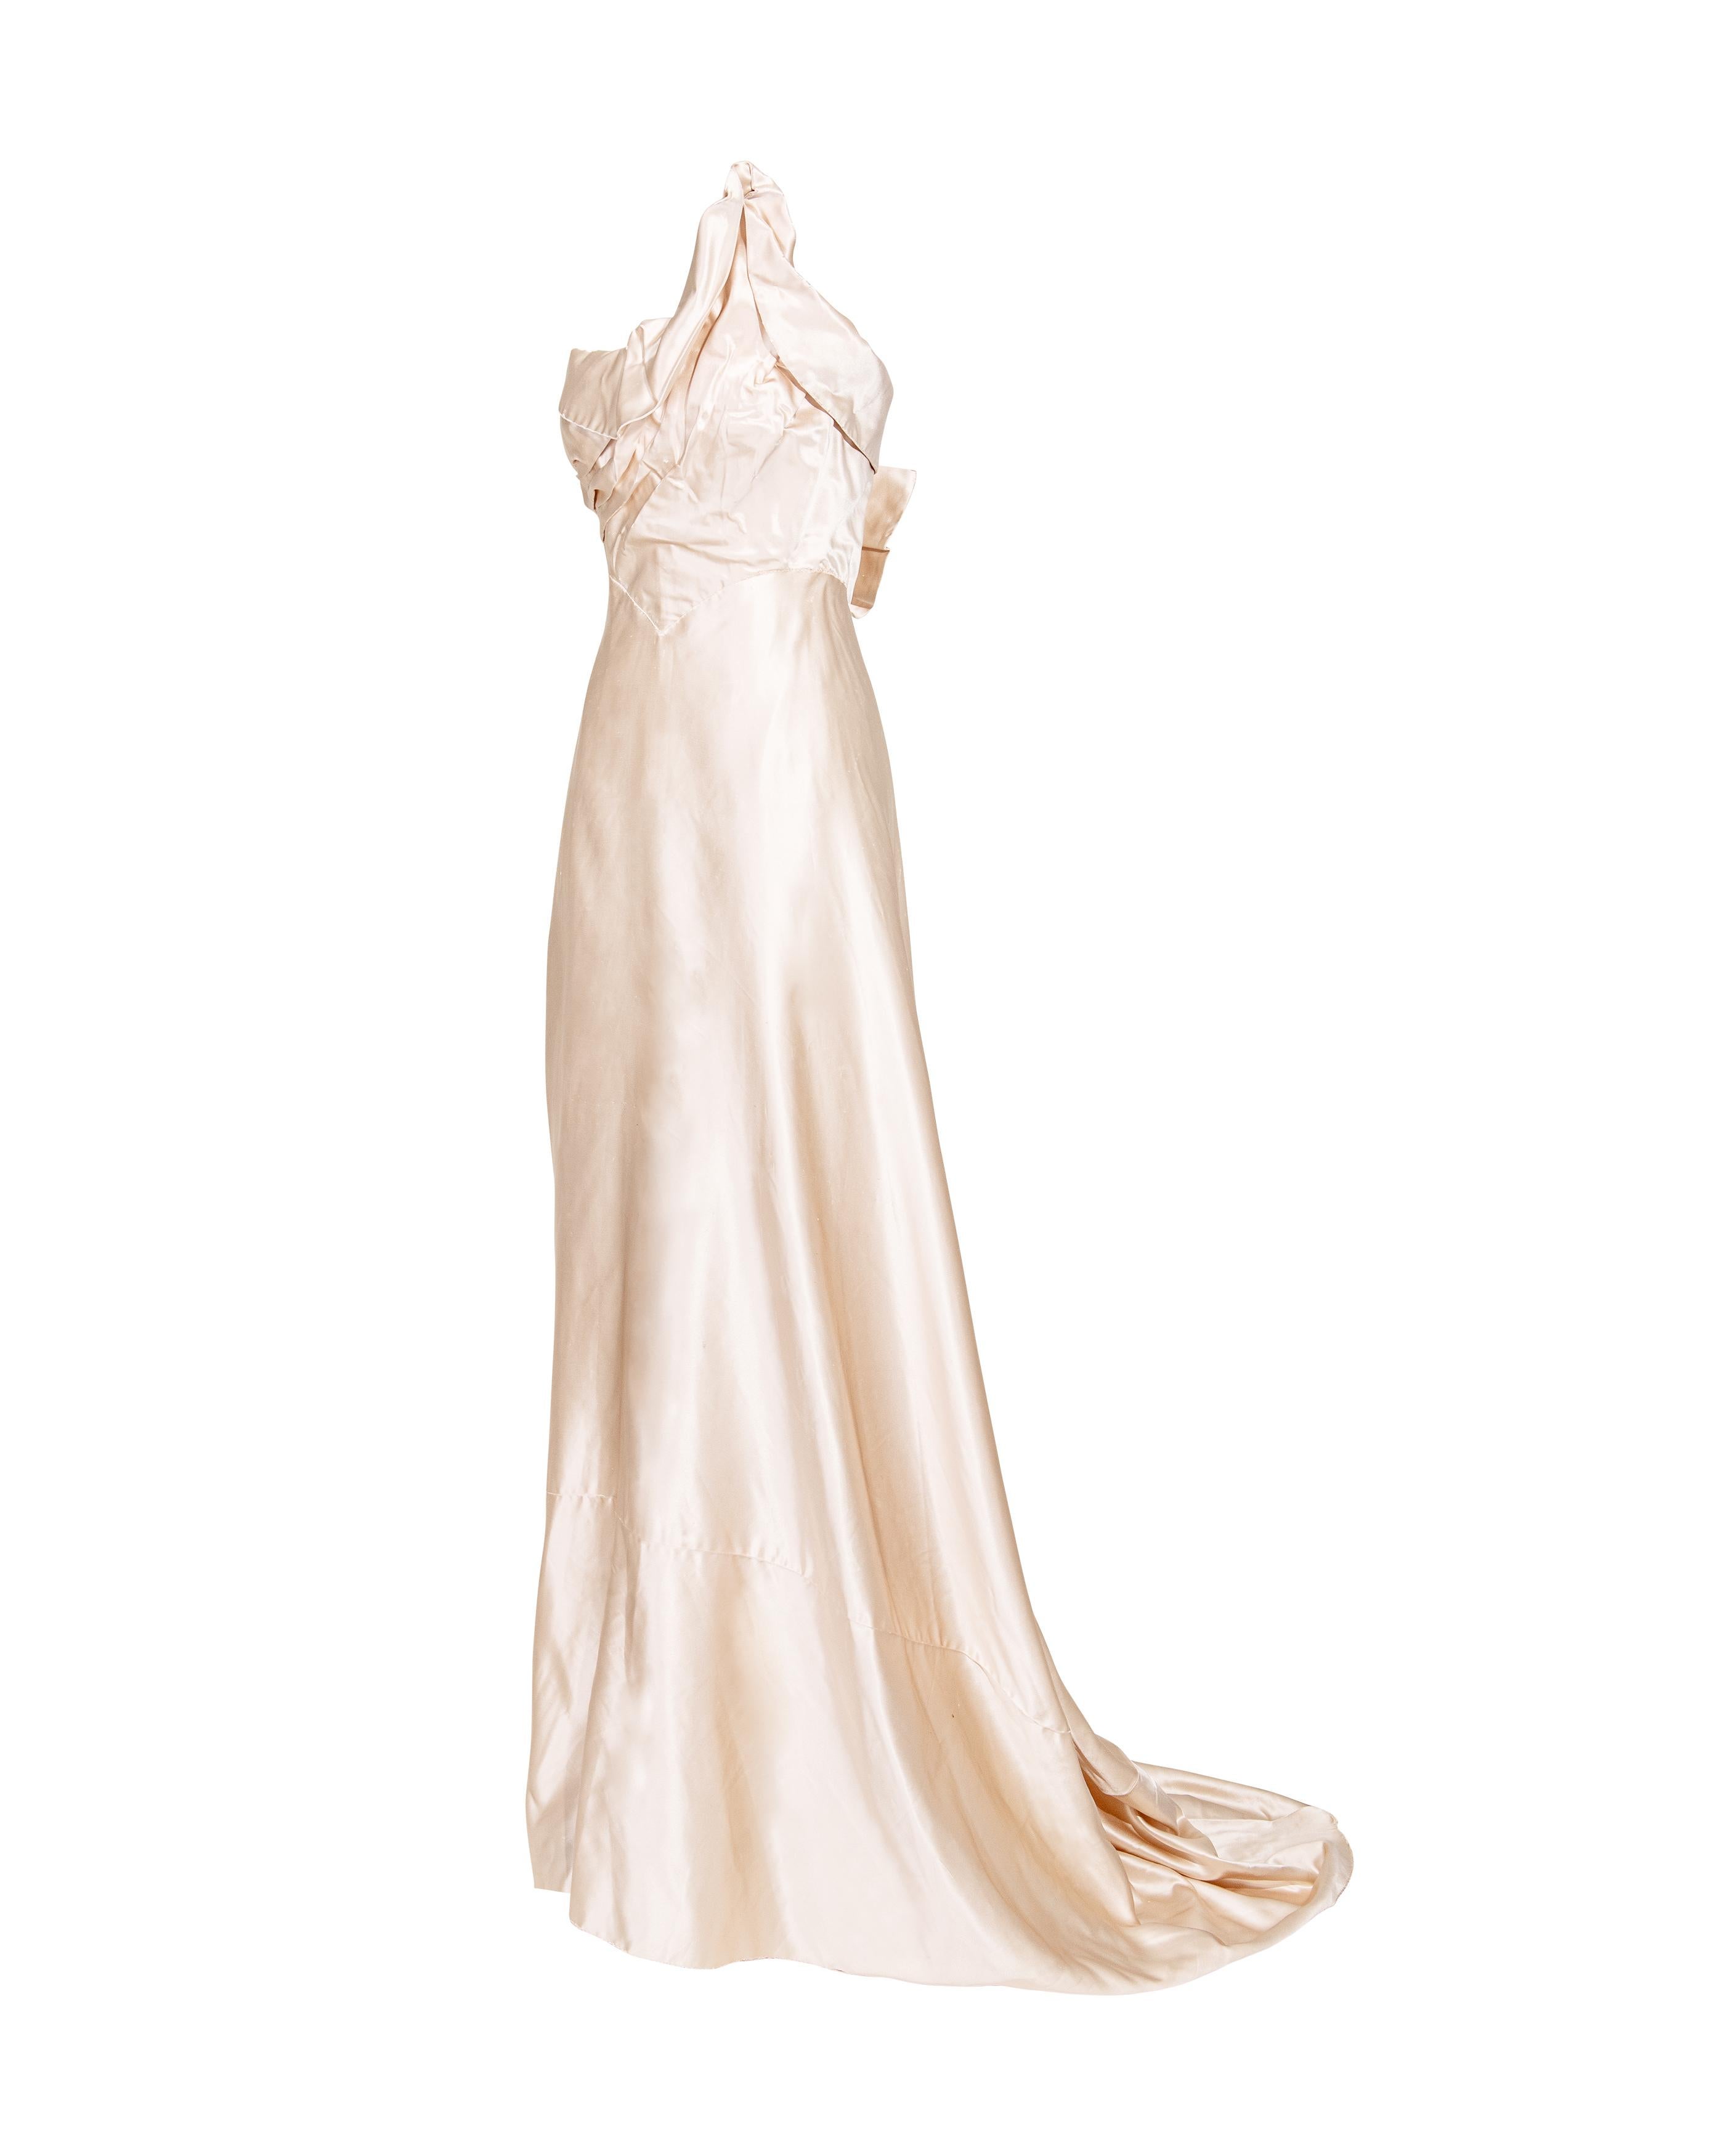 1940's Irene Lentz Haute Couture strapless high-low silk gown. Sculptural style cream silk gown that features deconstructed pleating and asymmetrical point at left side bustier. High-low effect with midi length front and long hem with slight train.